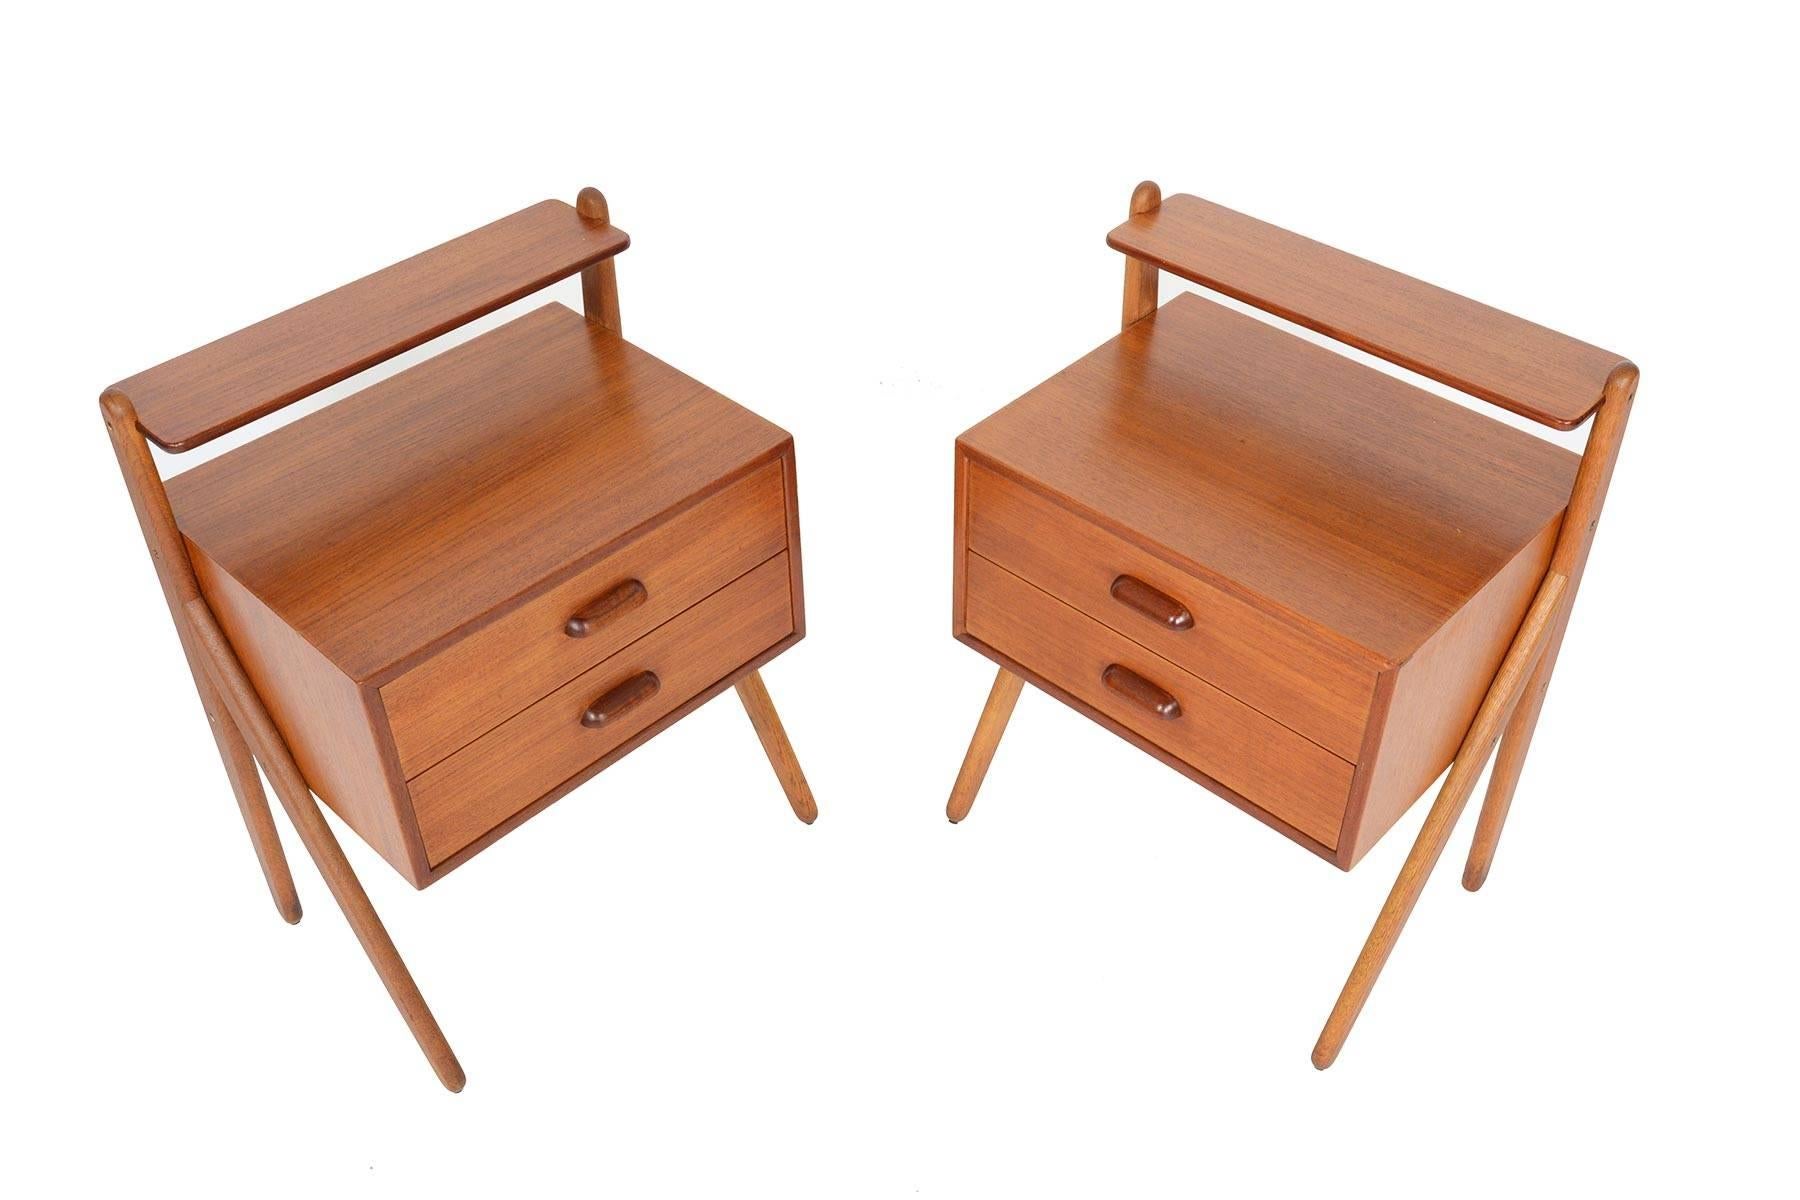 This lovely pair of Danish modern midcentury V-legged nightstands were manufactured by Ølholm Møbelfabrik. Crafted in teak with gorgeous oak legs, these nightstands offer two drawers and a small shelf. In excellent original condition with typical